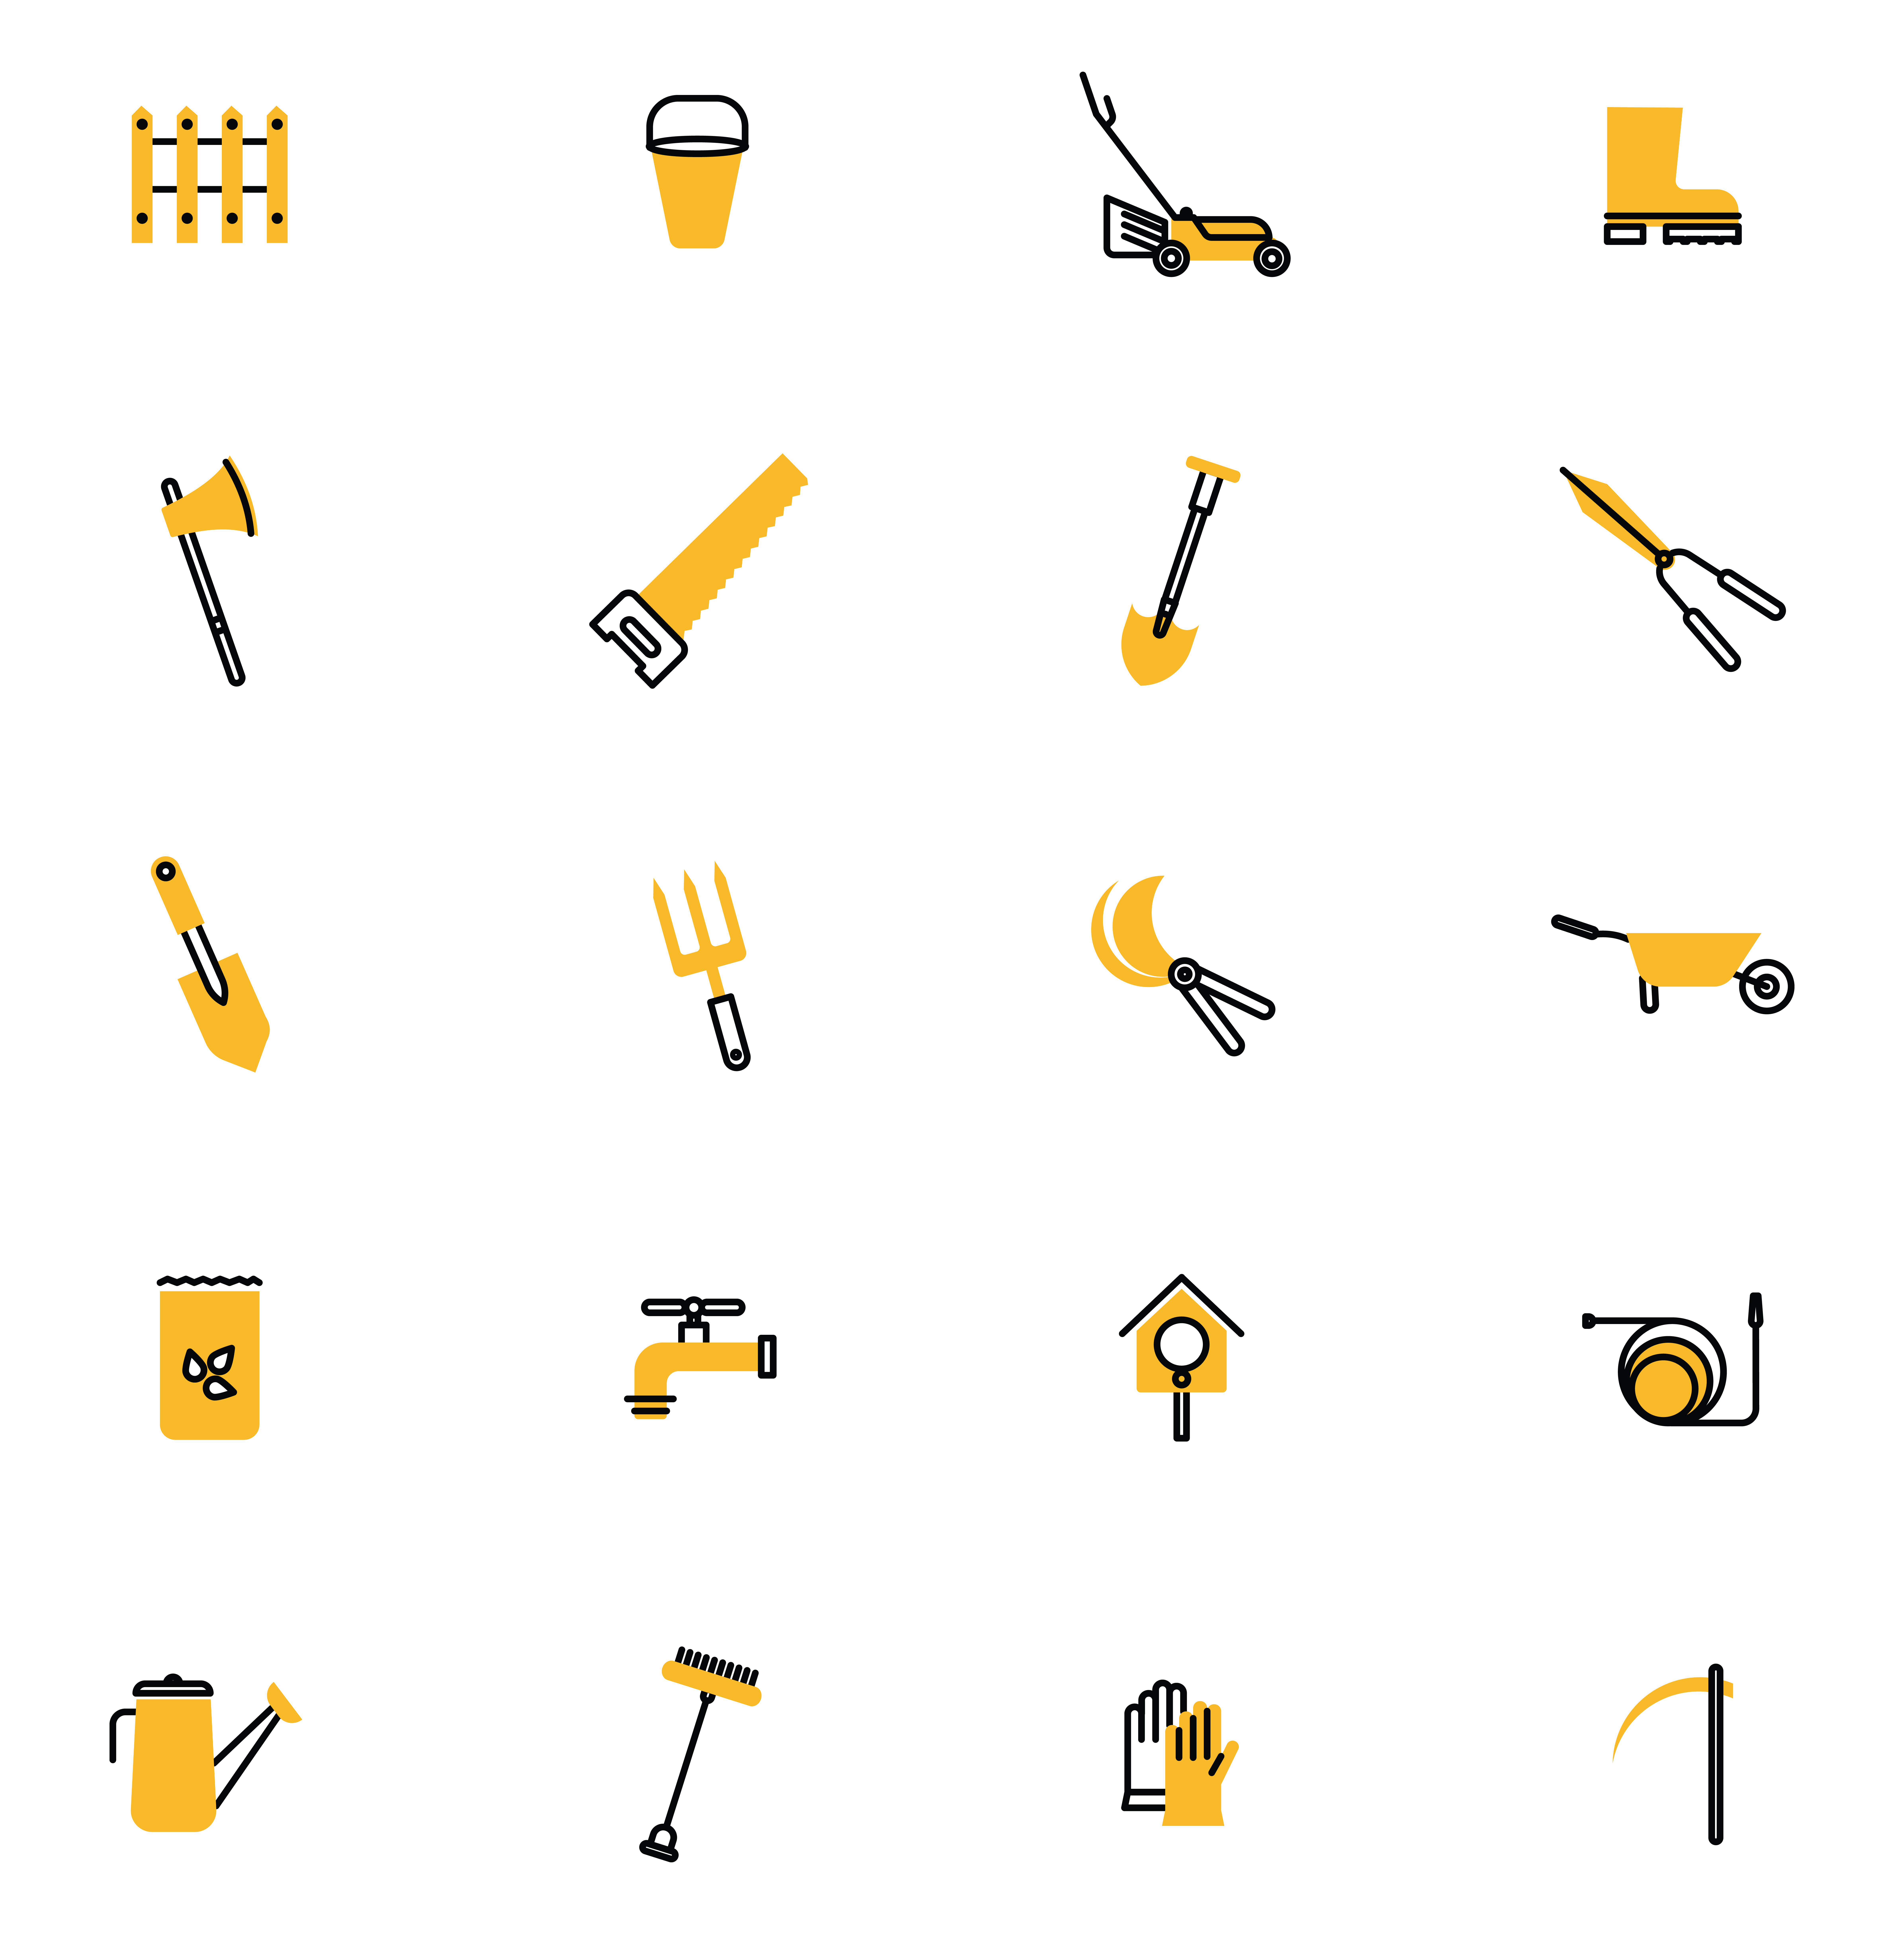 Bunch of different types of tools on a white background.